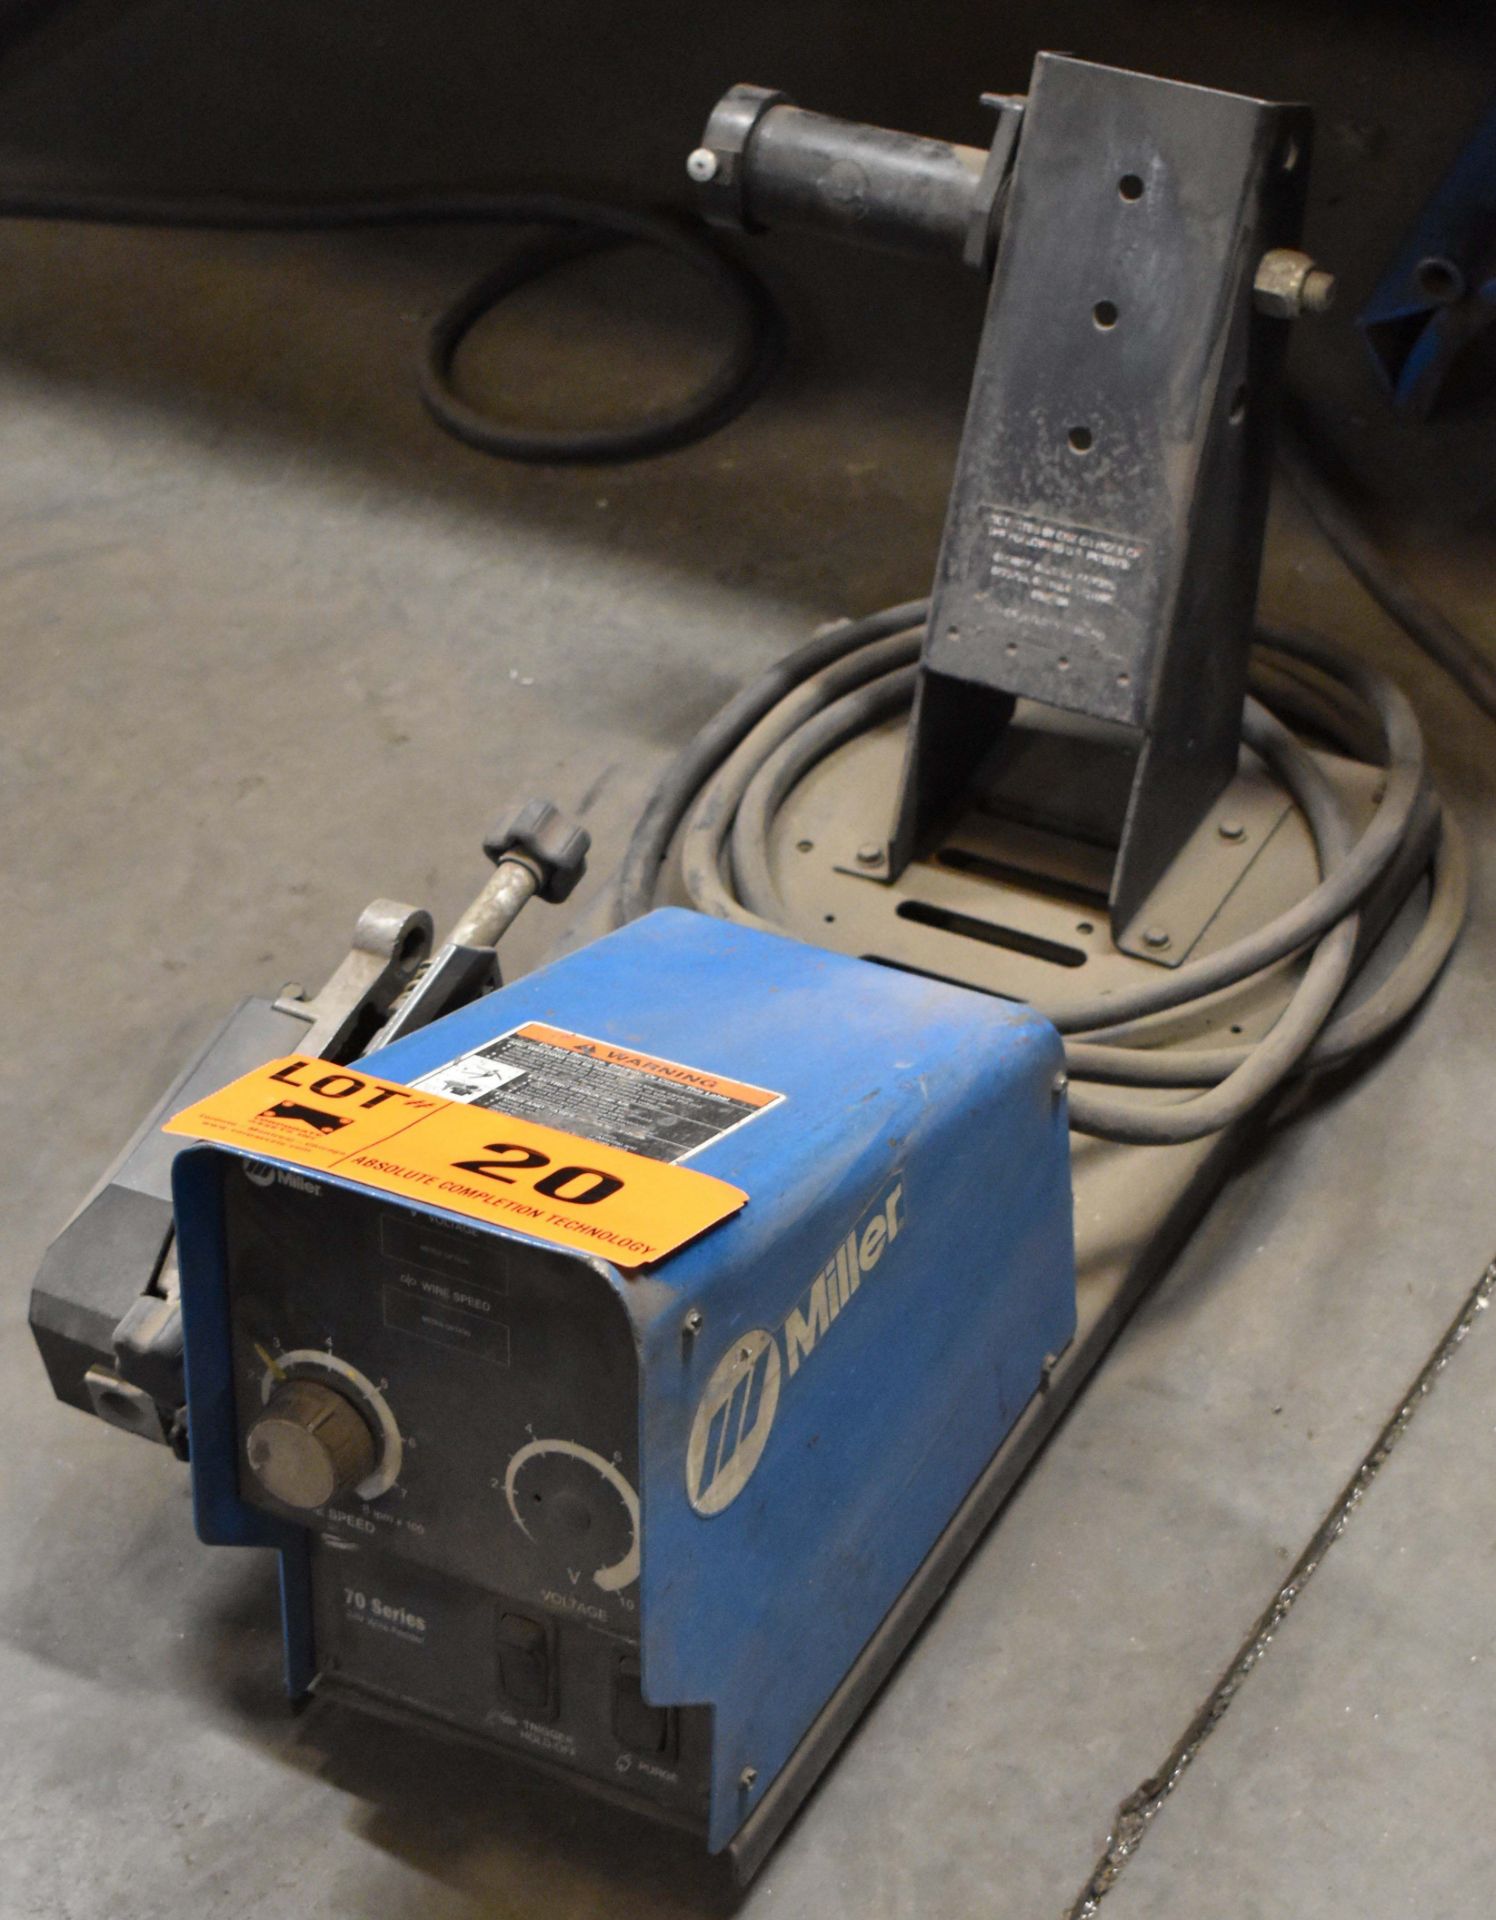 MILLER 70 SERIES WIRE FEEDER [RIGGING FEES FOR LOT #20 - $10 USD PLUS APPLICABLE TAXES]